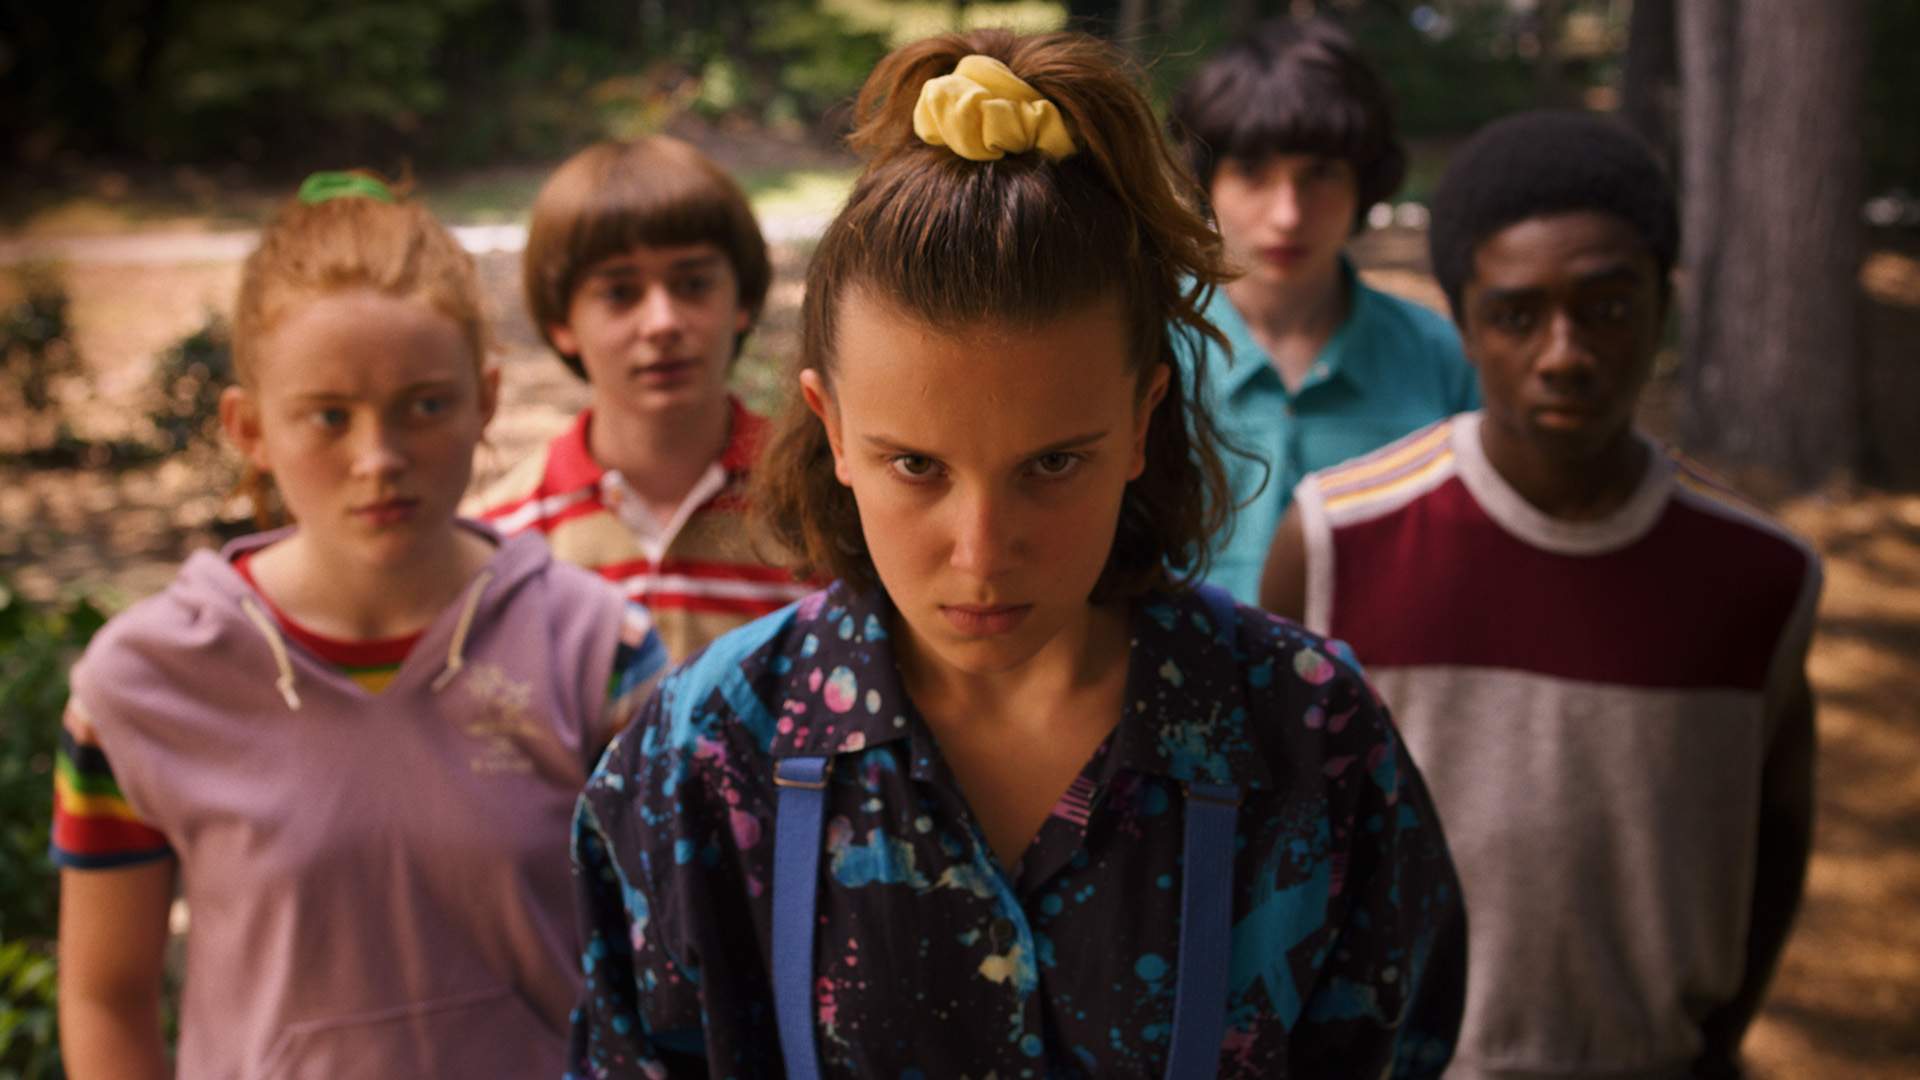 The Dark and Creepy Final Trailer for 'Stranger Things' Season Three Is Here